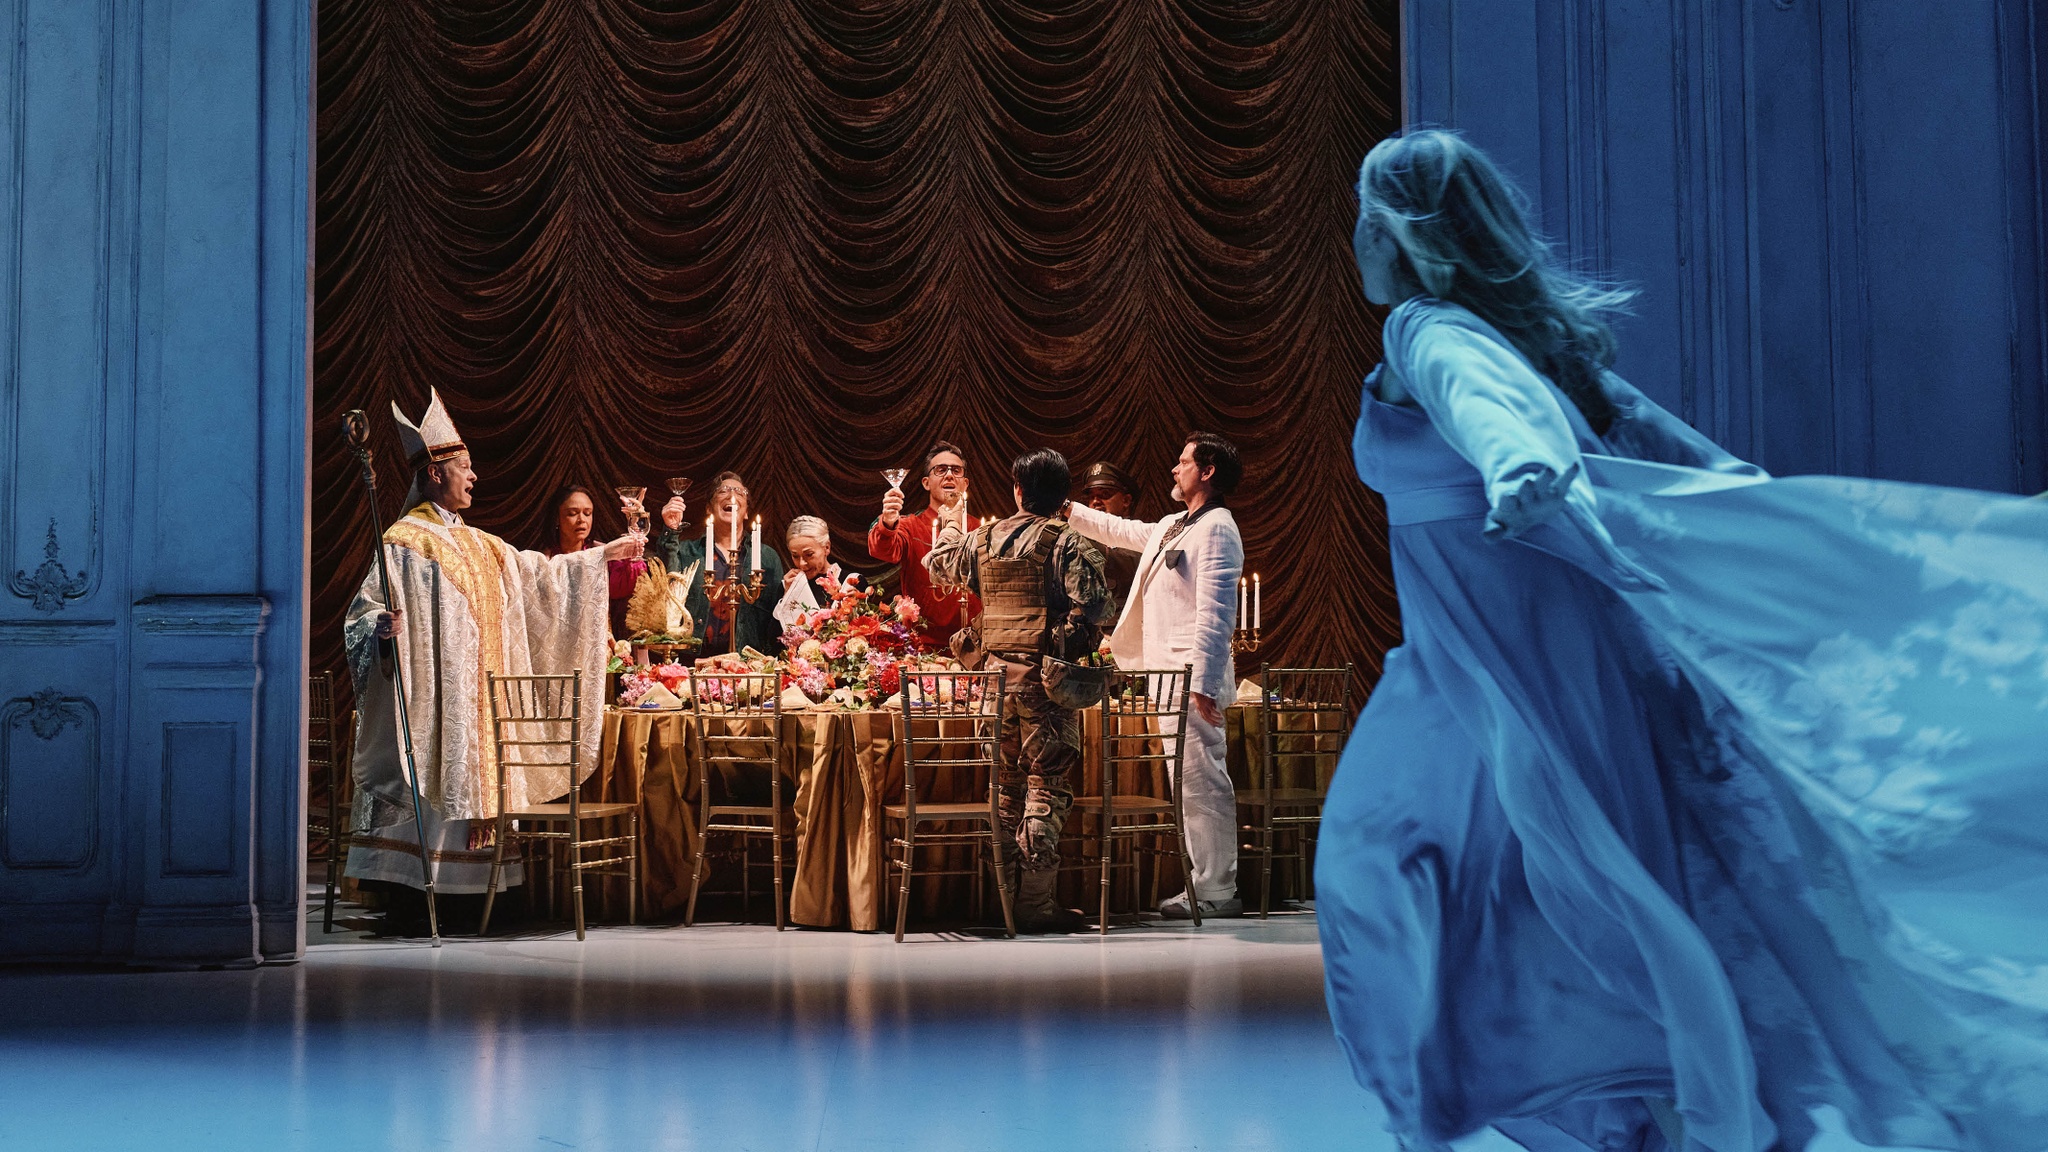 The cast of a play dressed as members of a dinner party lift glasses in a toast as they stand around a long table. At one end stands a guest dressed in white Catholic clerical robes and at the other end a man in a white suit stretches his arm out. In the foreground lit in liquidy blue light a white woman in a nightgown runs toward them, her gown and blond hair flowing behind her. 